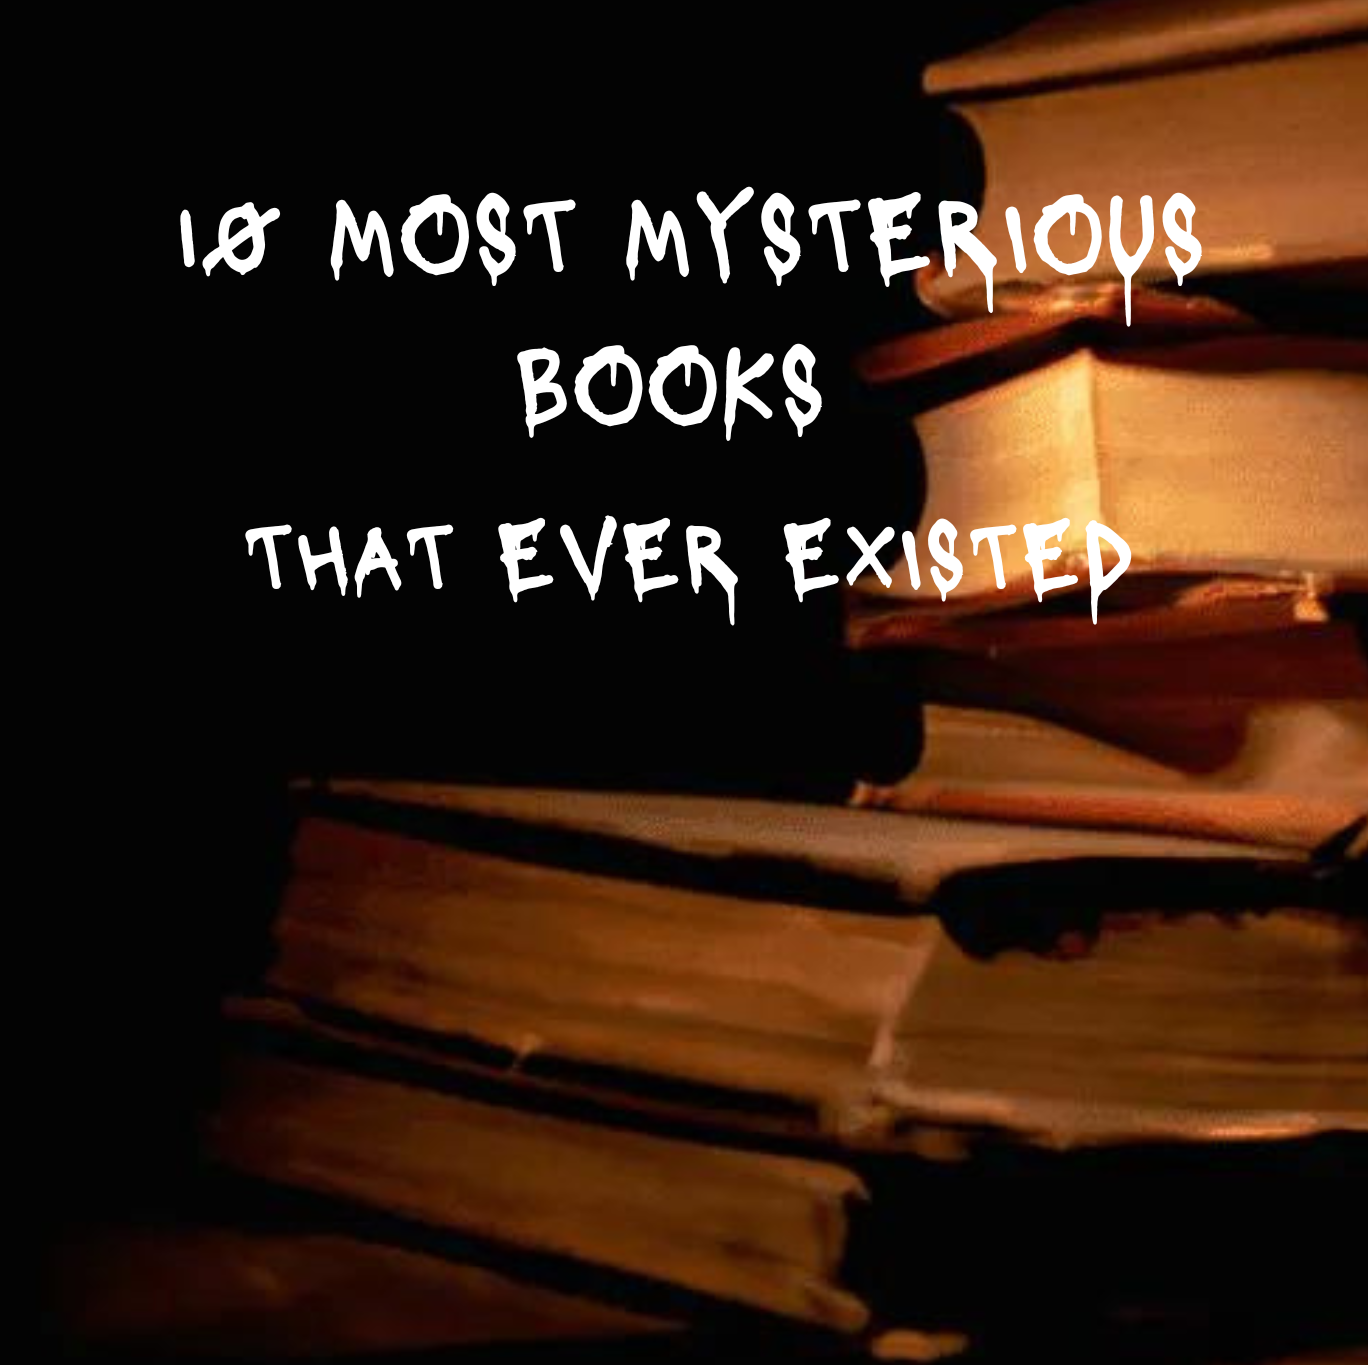 8 MOST MYSTERIOUS BOOKS THAT EVER EXISTED